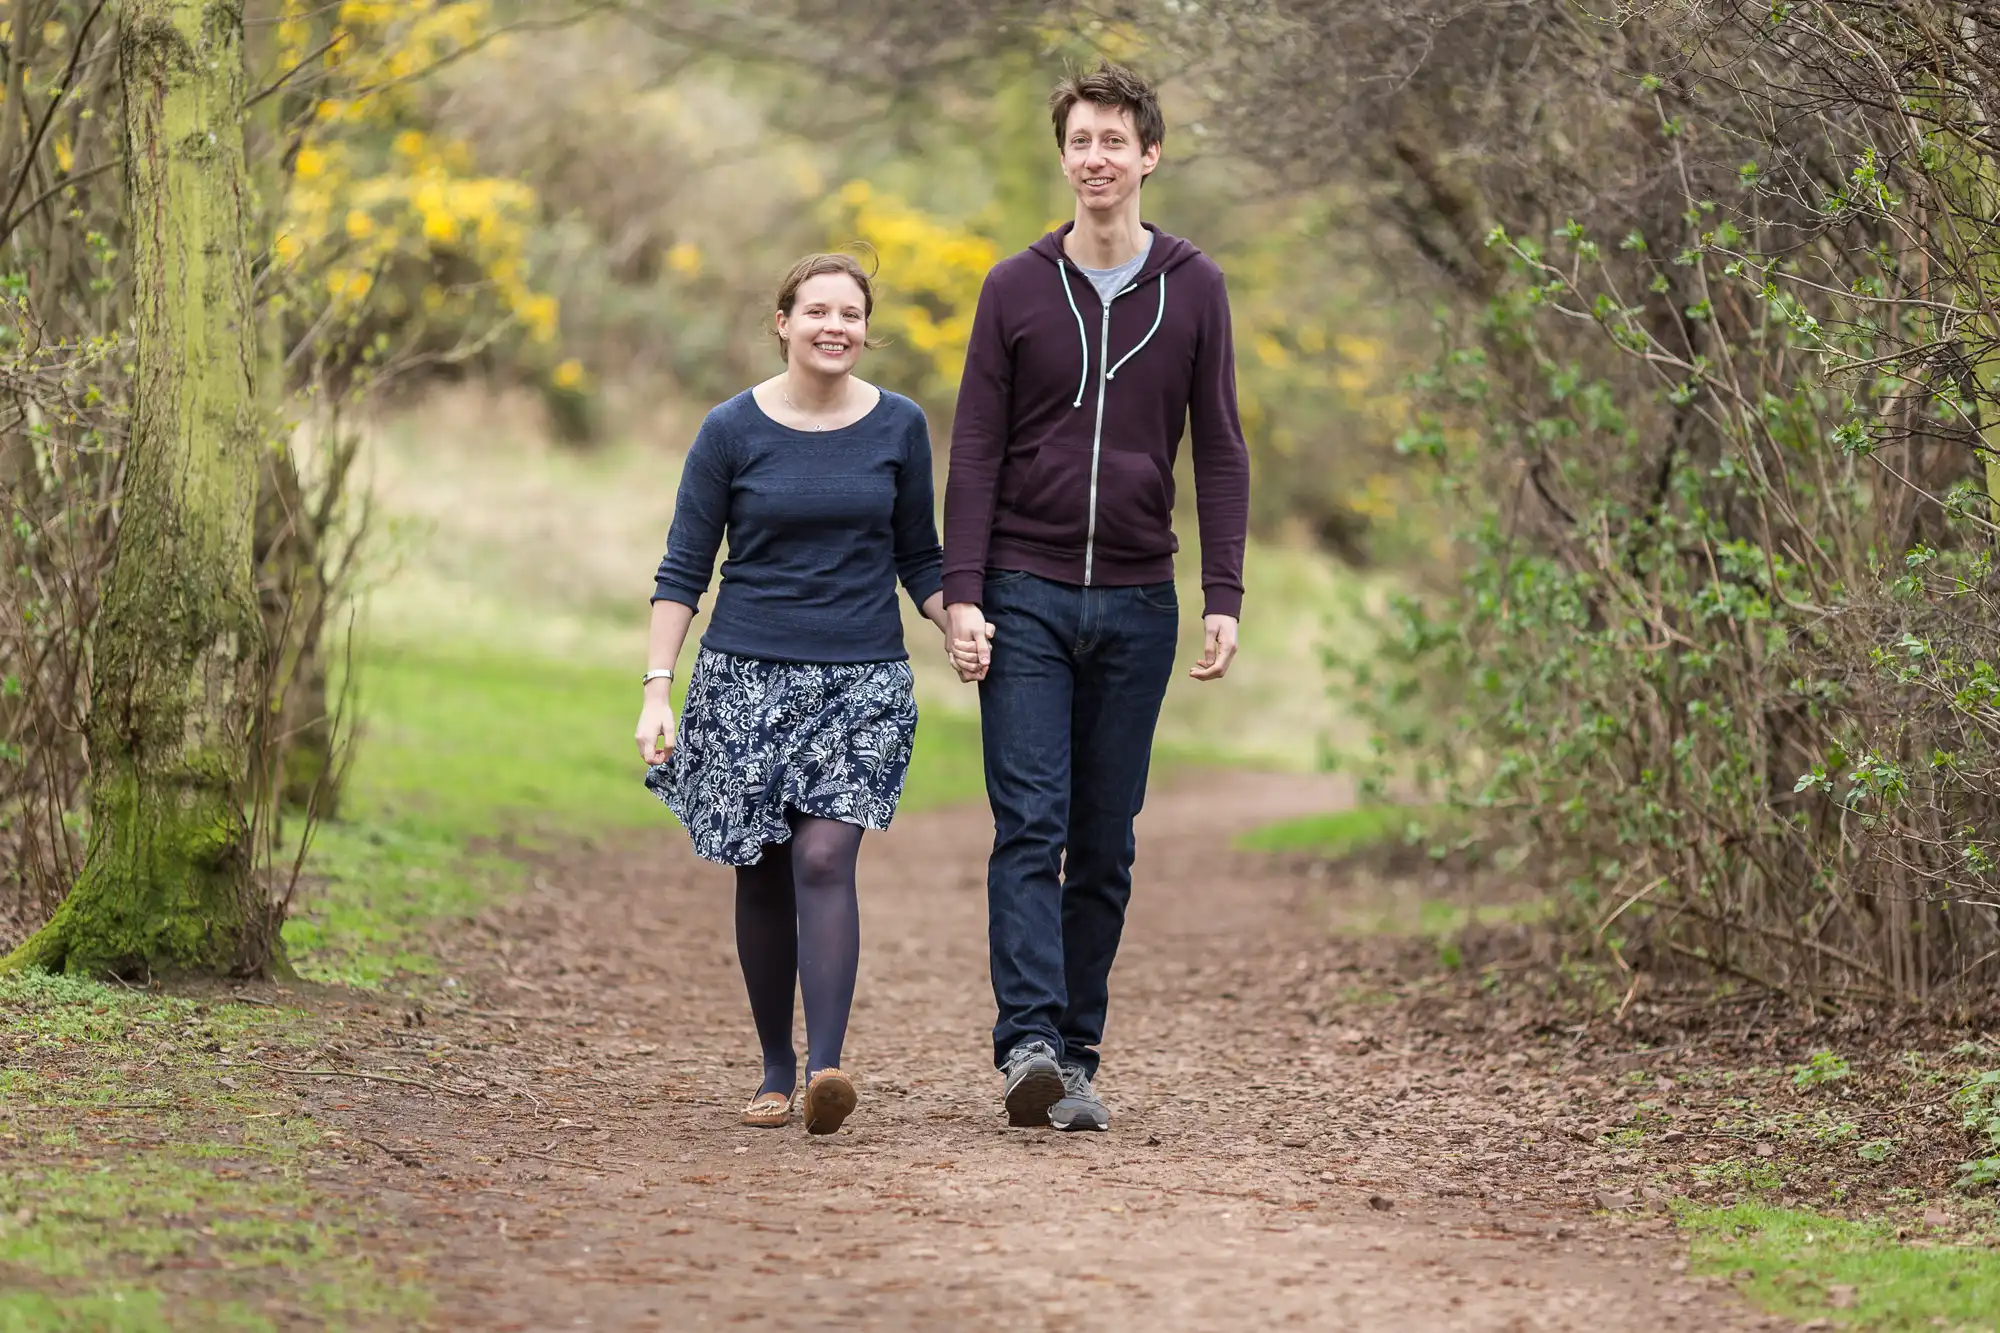 A young couple holding hands and smiling while walking on a dirt path in a lush park.